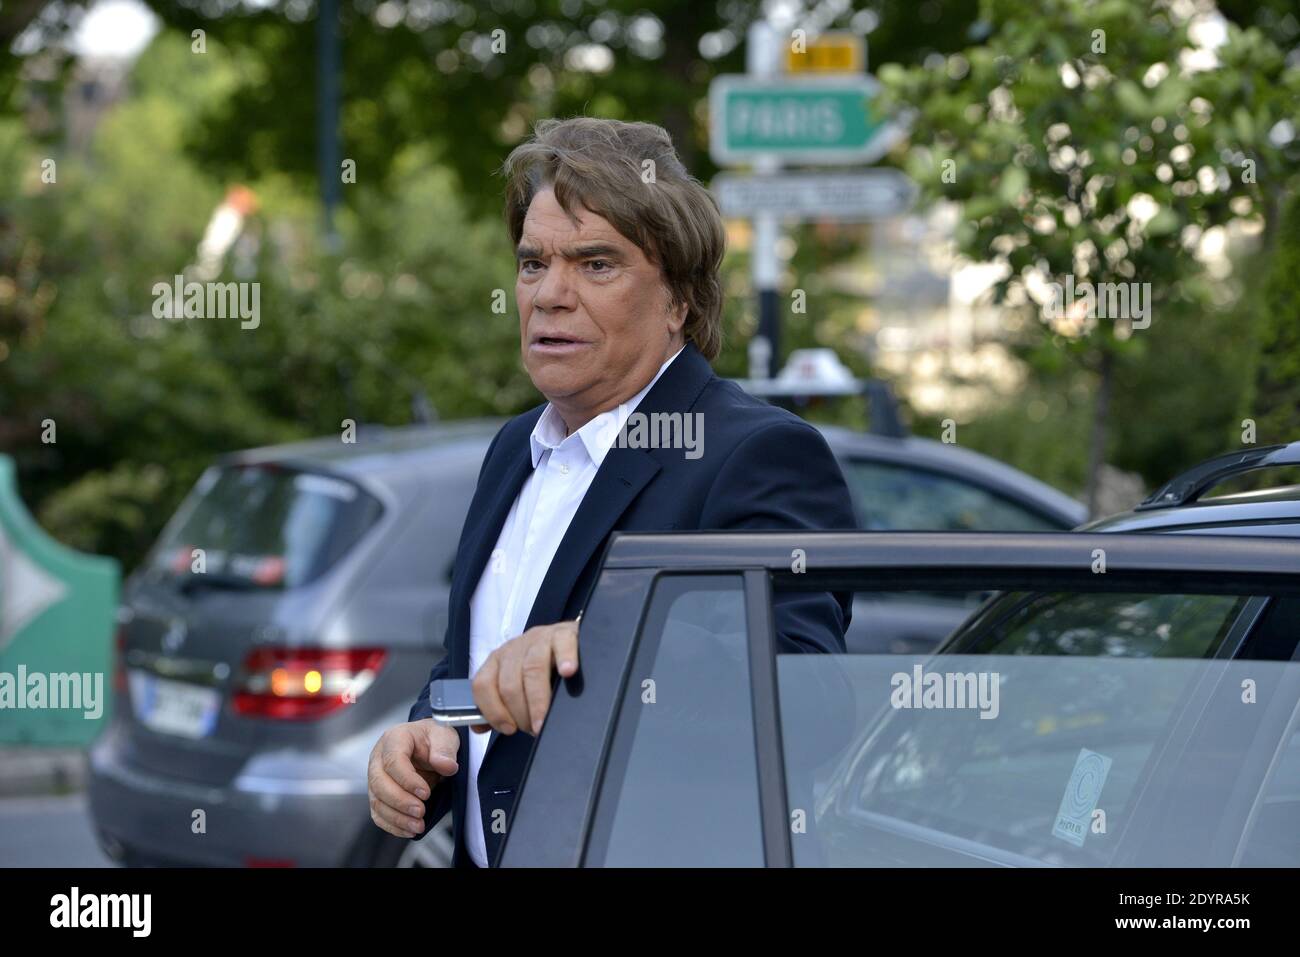 Bernard Tapie arrives to attend a broadcasted debate on French news channel  iTele in Paris, France on July 10, 2013 as French investigators have  ordered today some of his assets seized as